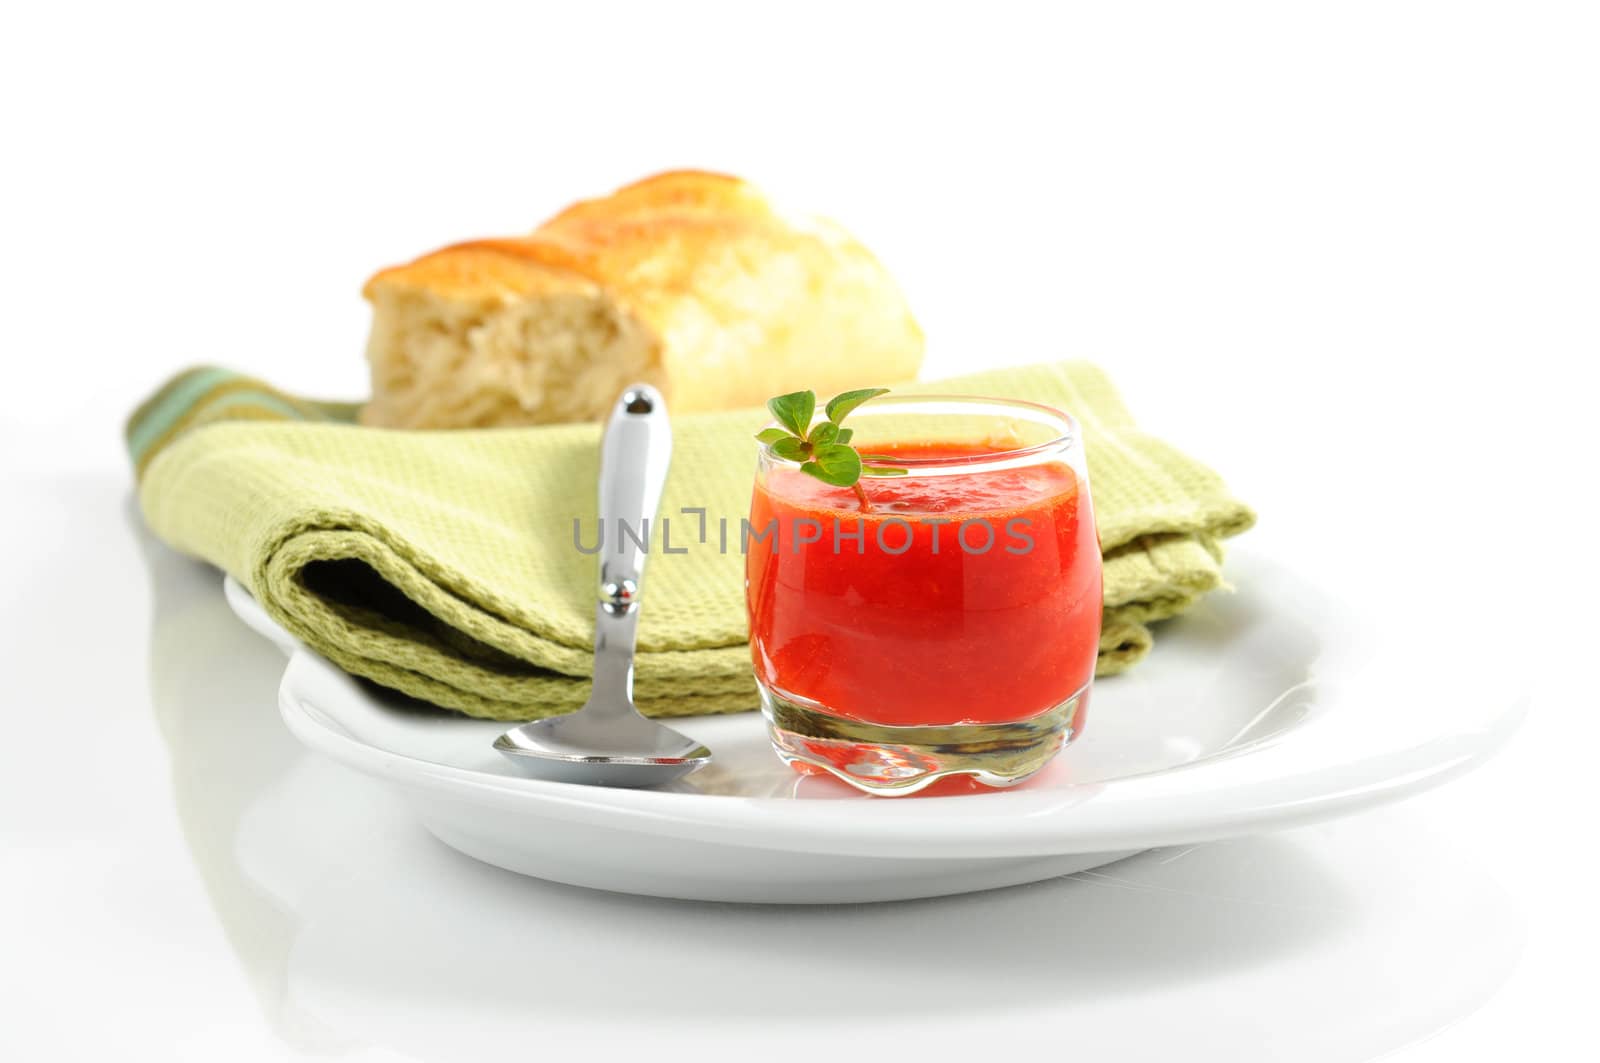 Delicious roasted red pepper soup can be served hot or cold.